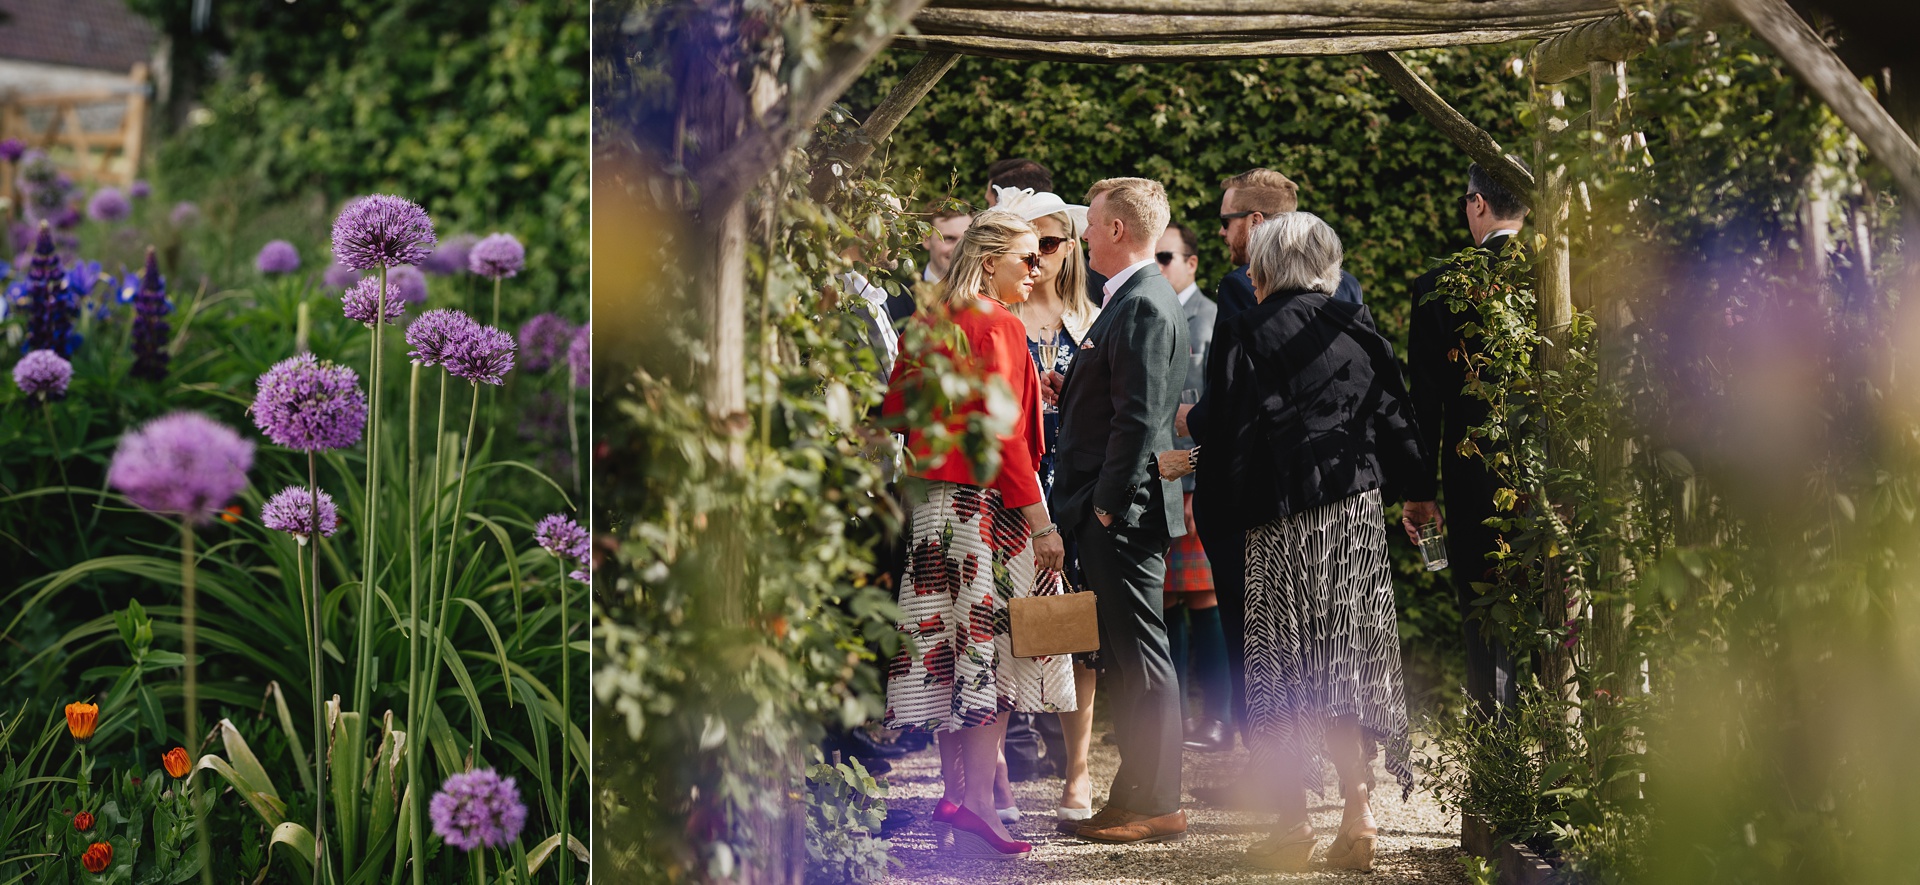 Wedding guests in the kitchen garden at River Cottage